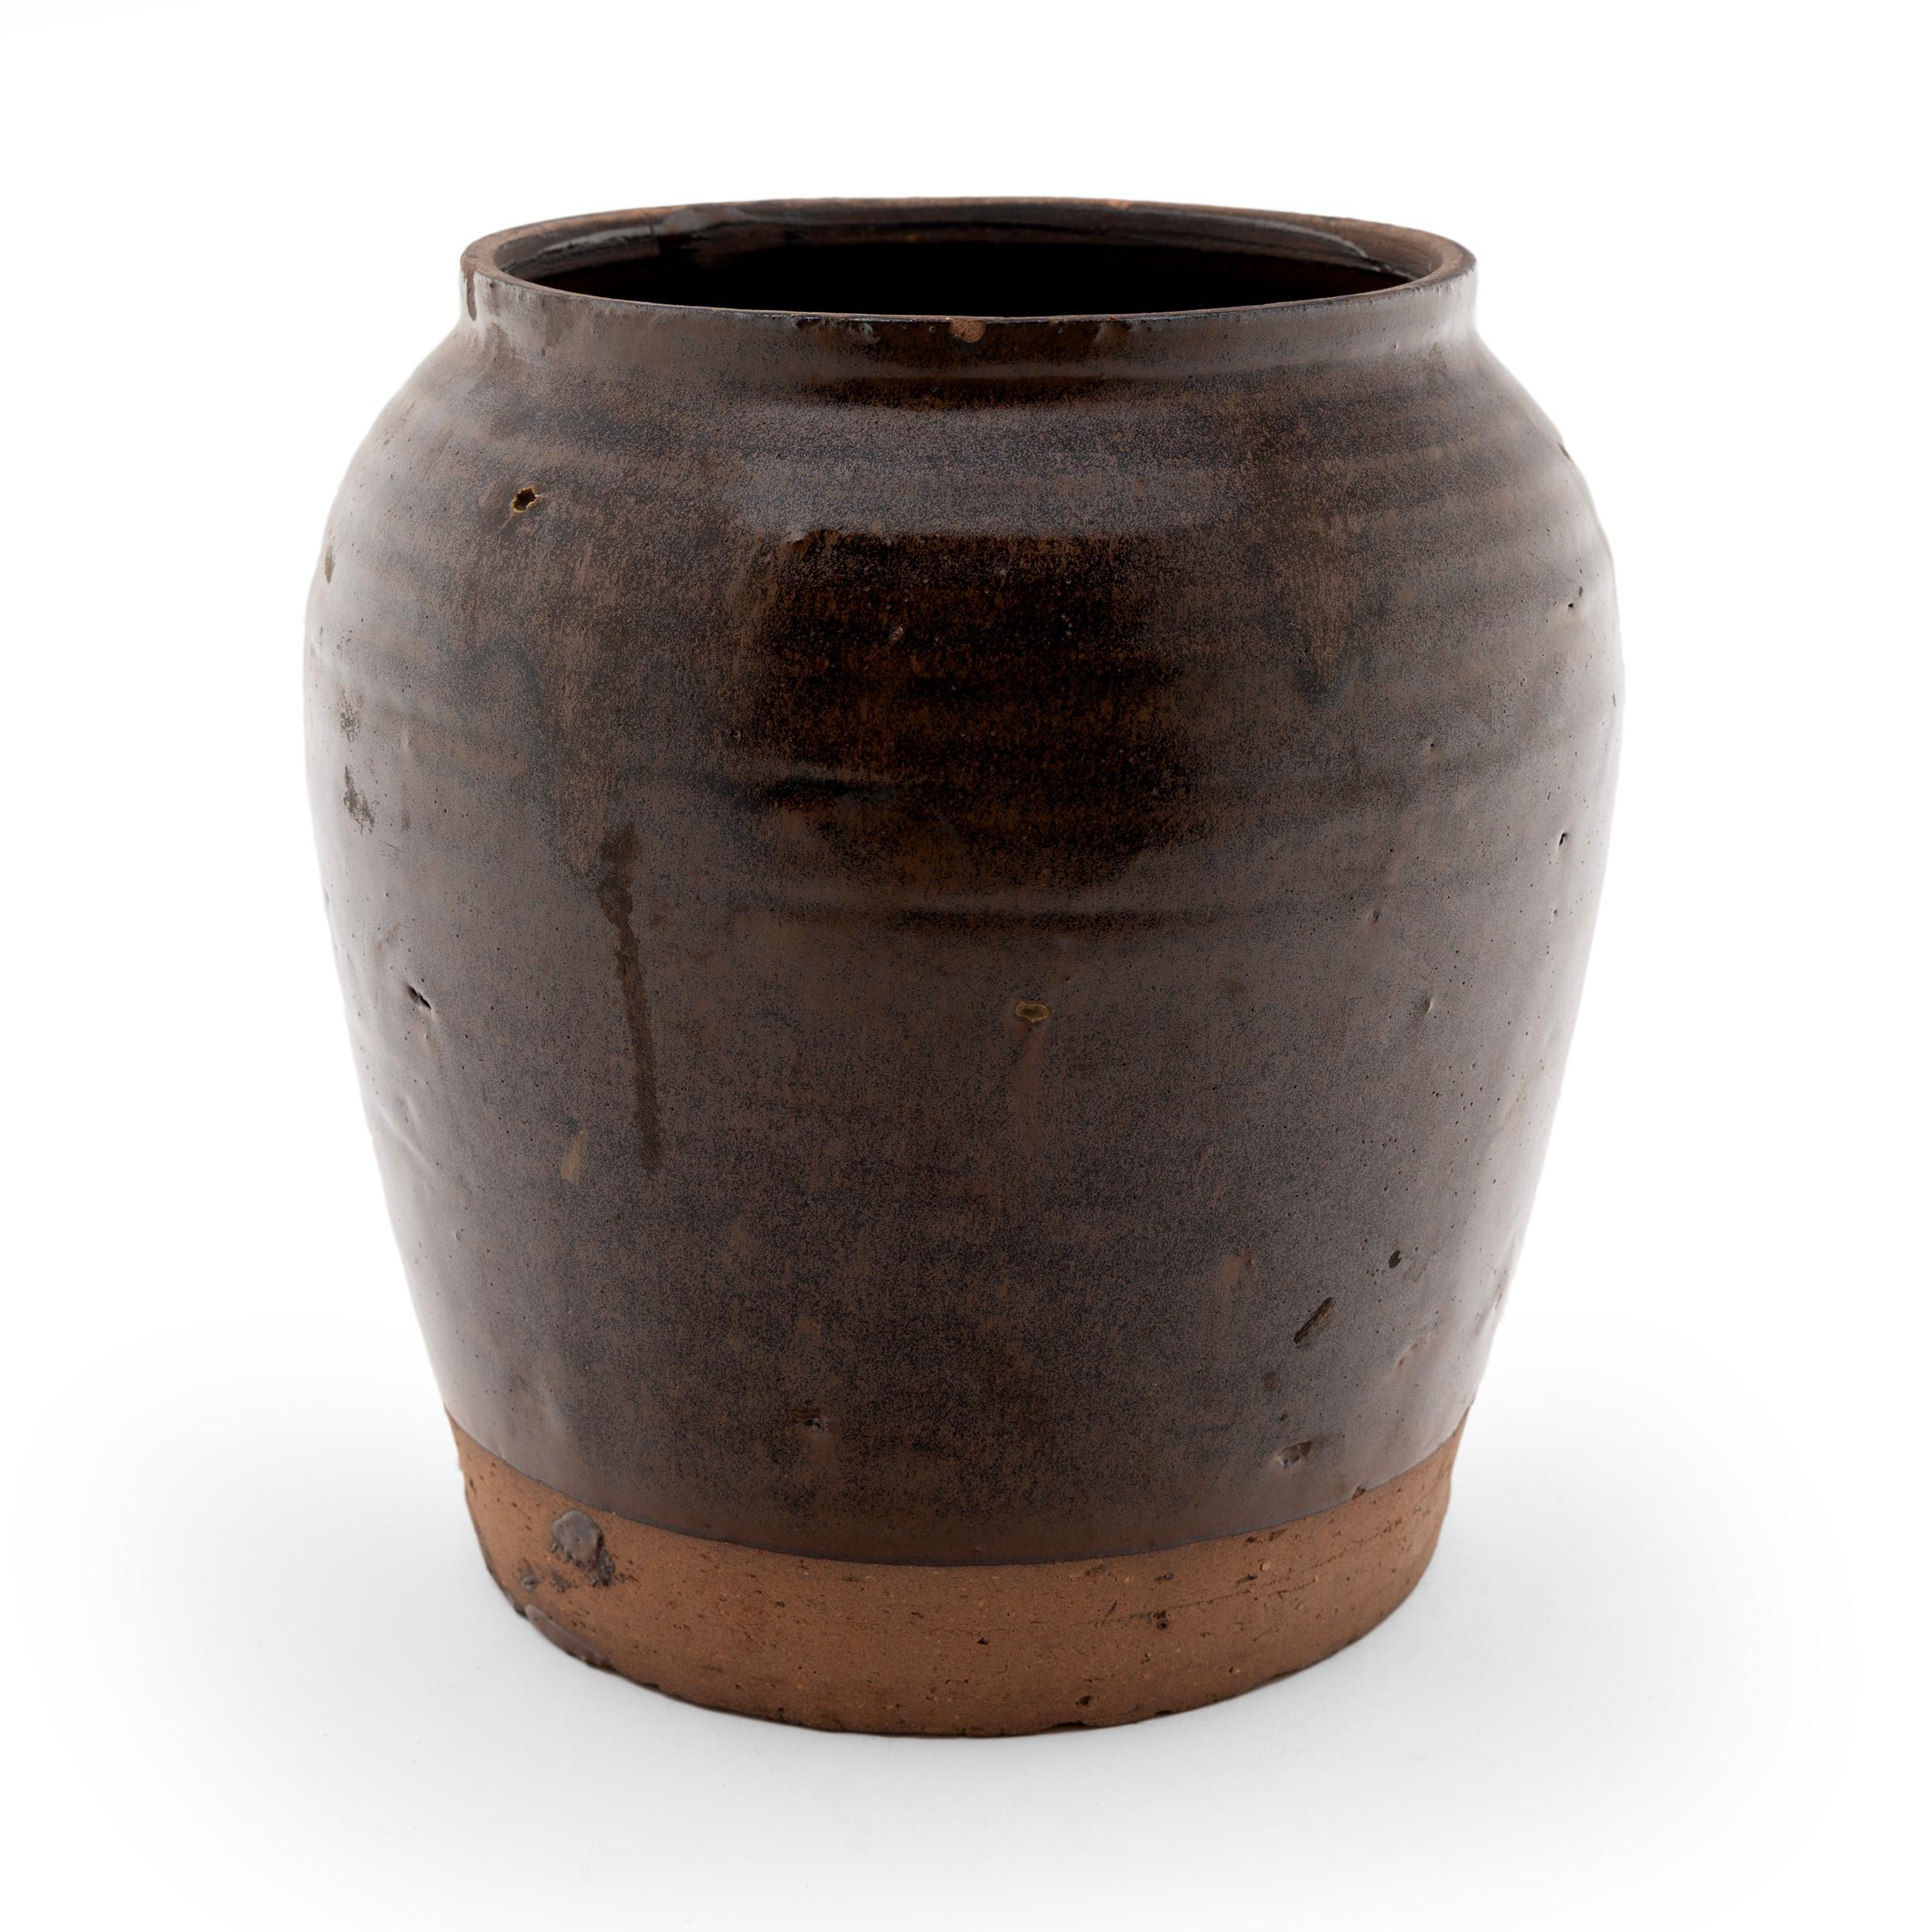 Cloaked inside and out with a dark brown glaze, this Chinese terra cotta kitchen jar dates to the early 20th-century. As evidenced by the glazed interior, this wide-mouth jar was used in a provincial Chinese kitchen for fermenting foods and